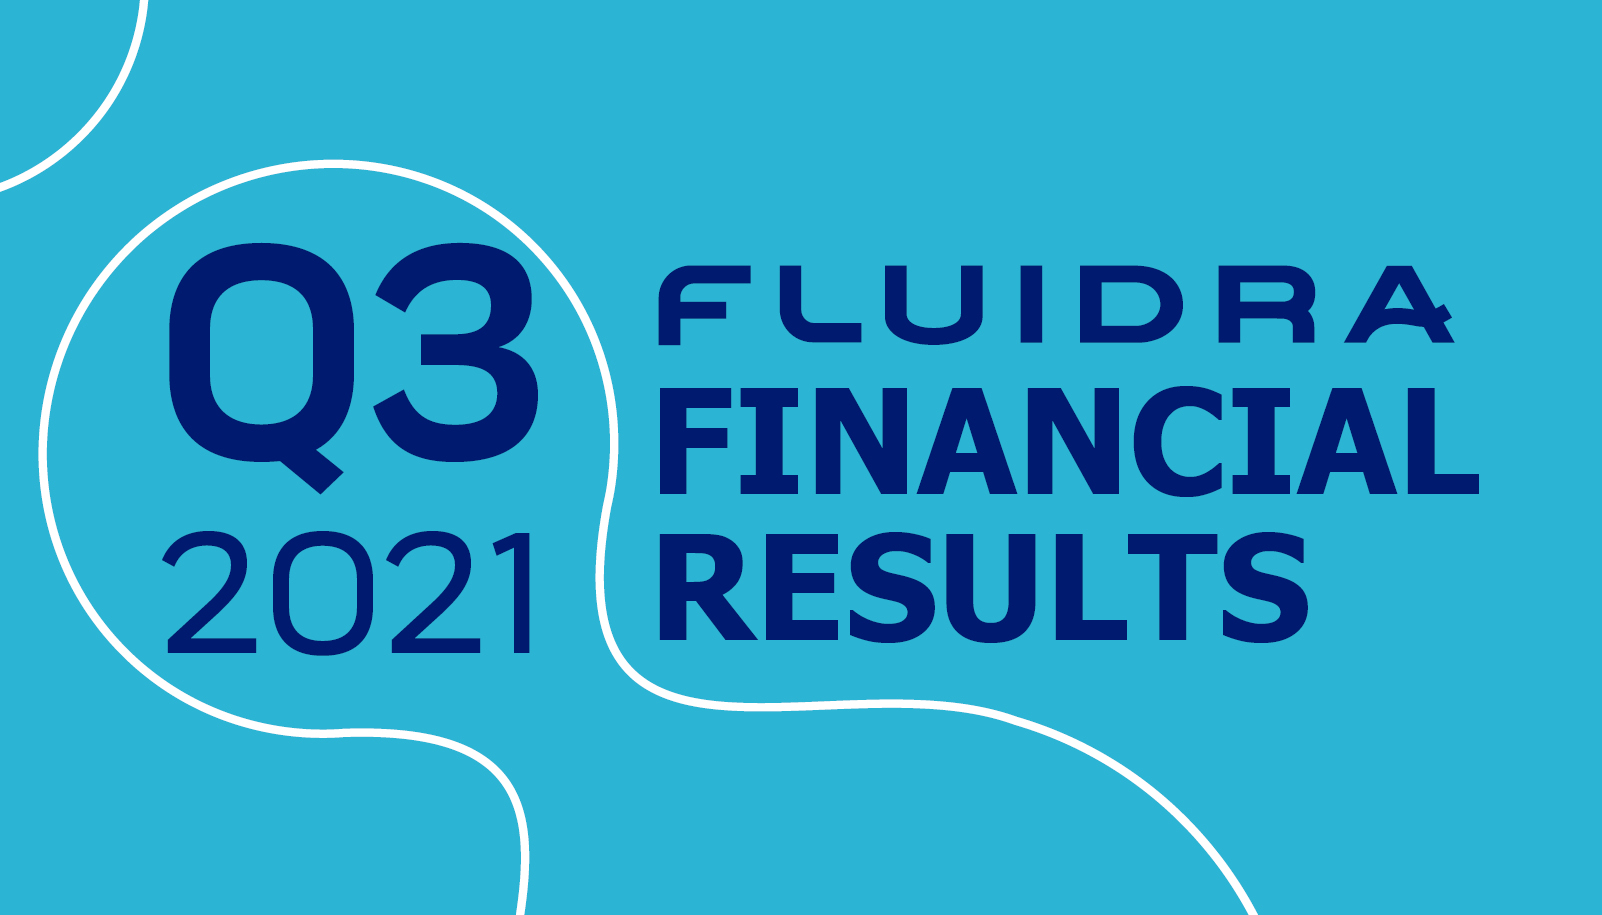 Fluidra triples its net profit to 221 million euros in the first nine months of 2021